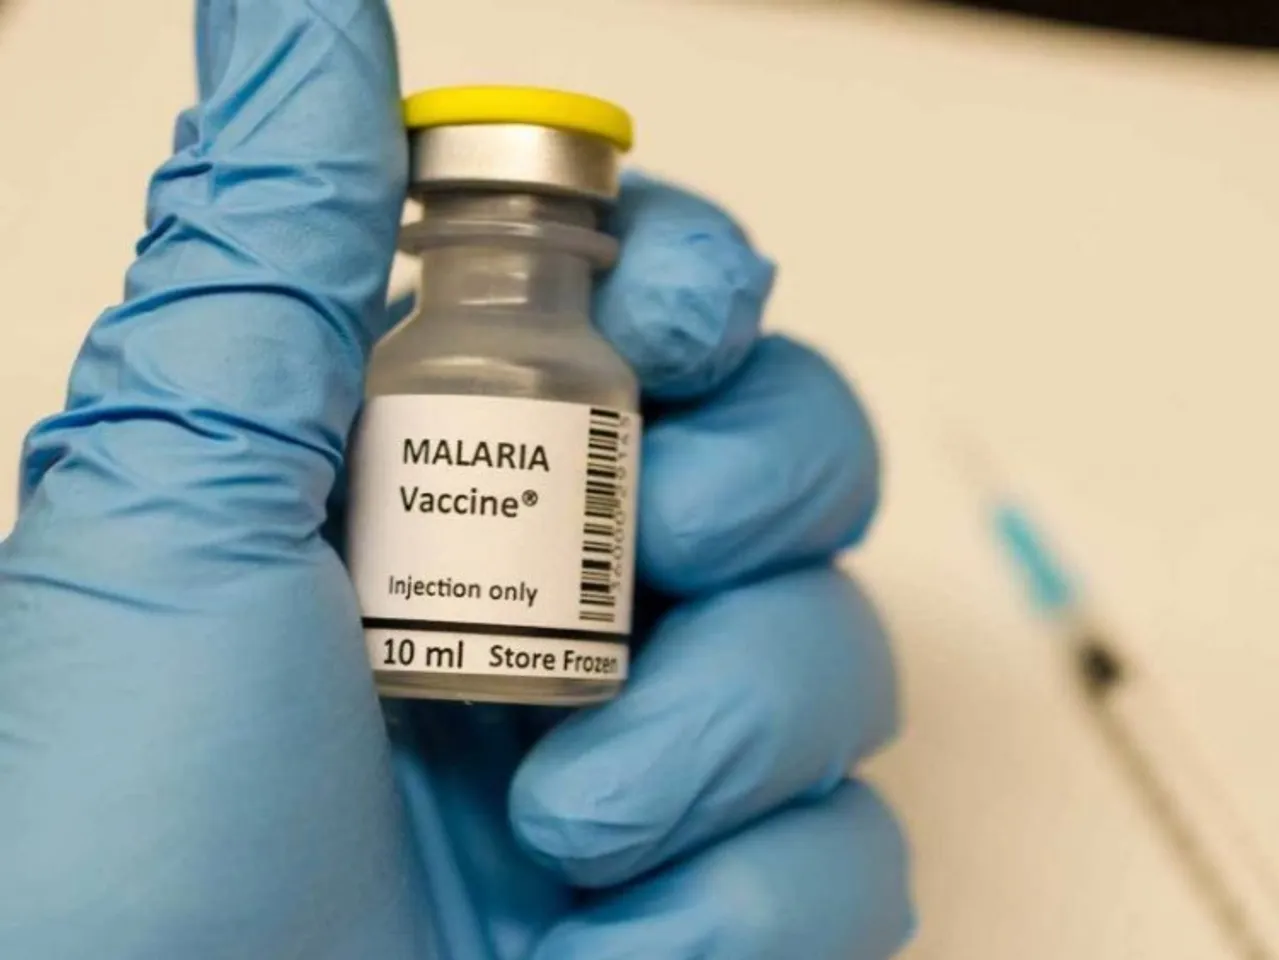 Malaria booster vaccine shows up to 80 per cent efficacy: Lancet study